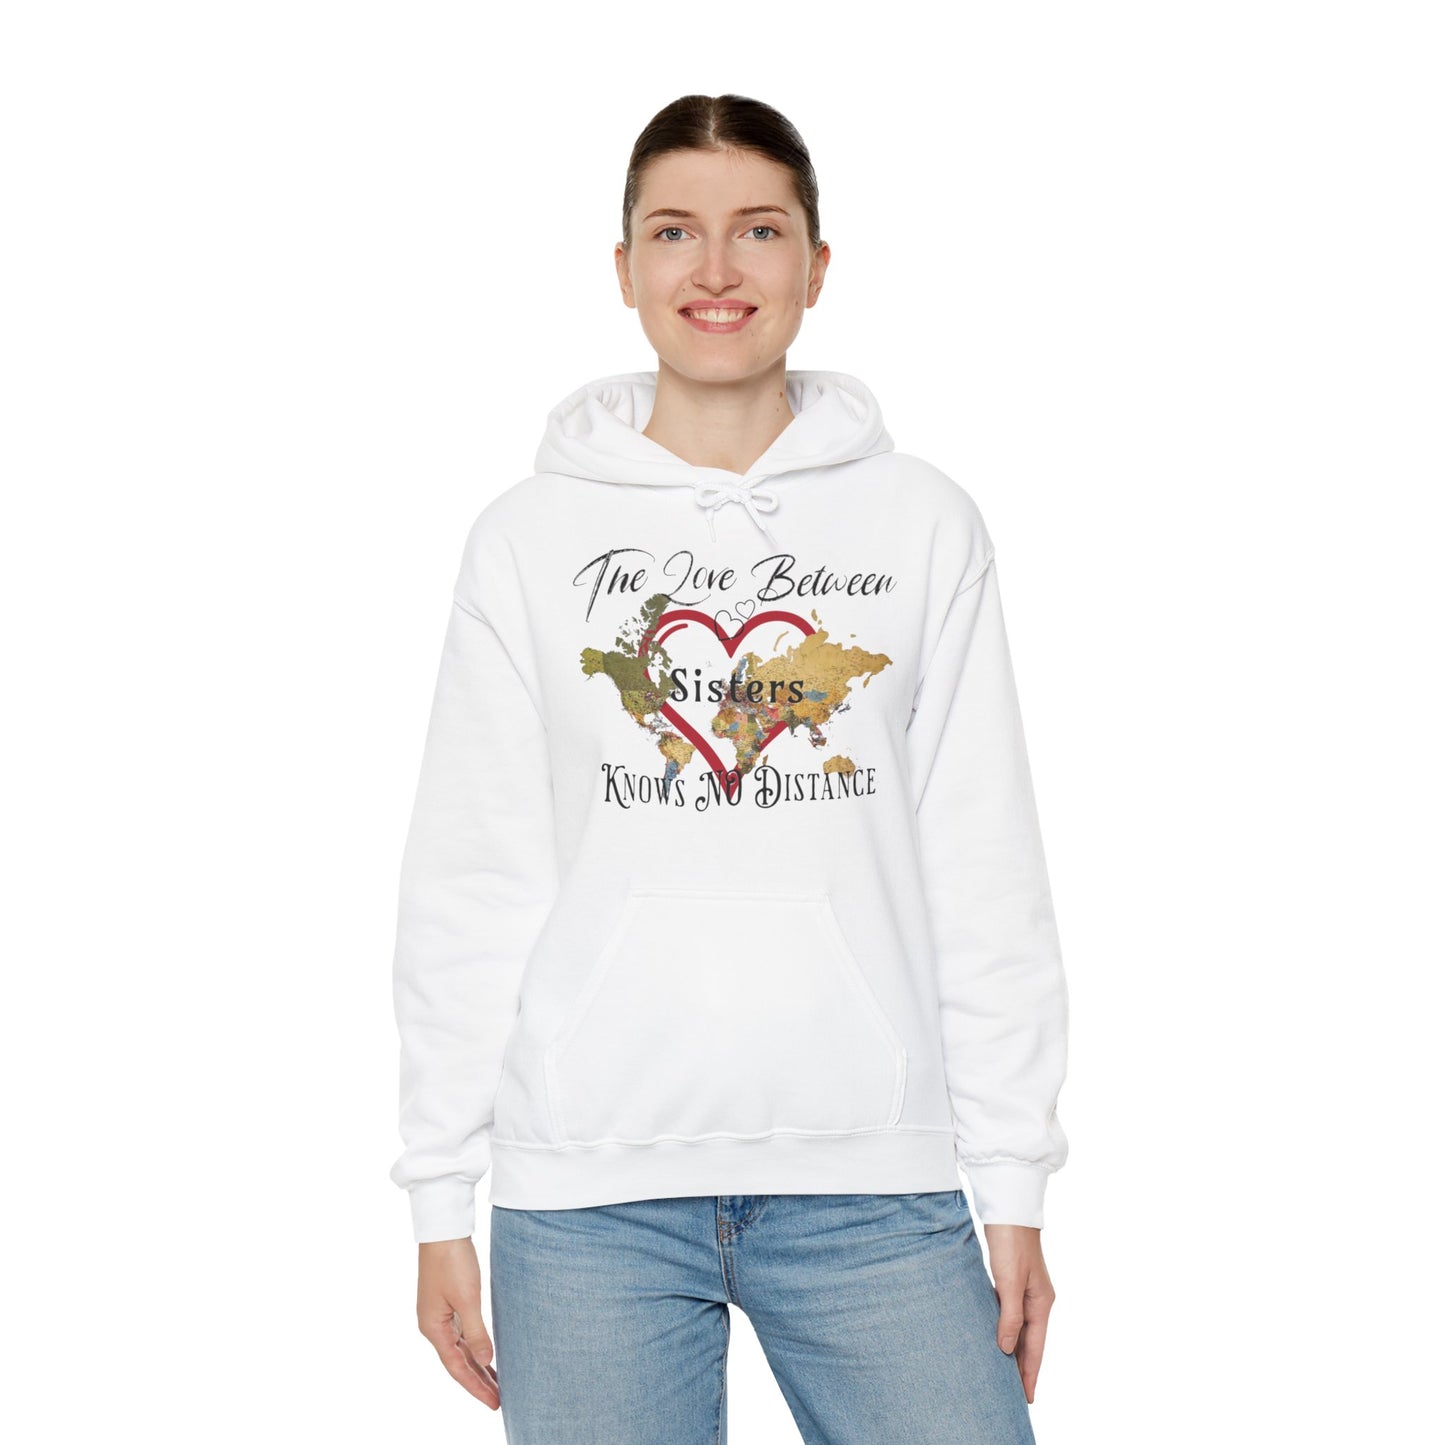 The love between sisters knows no distance - Unisex Heavy Blend™ Hooded Sweatshirt